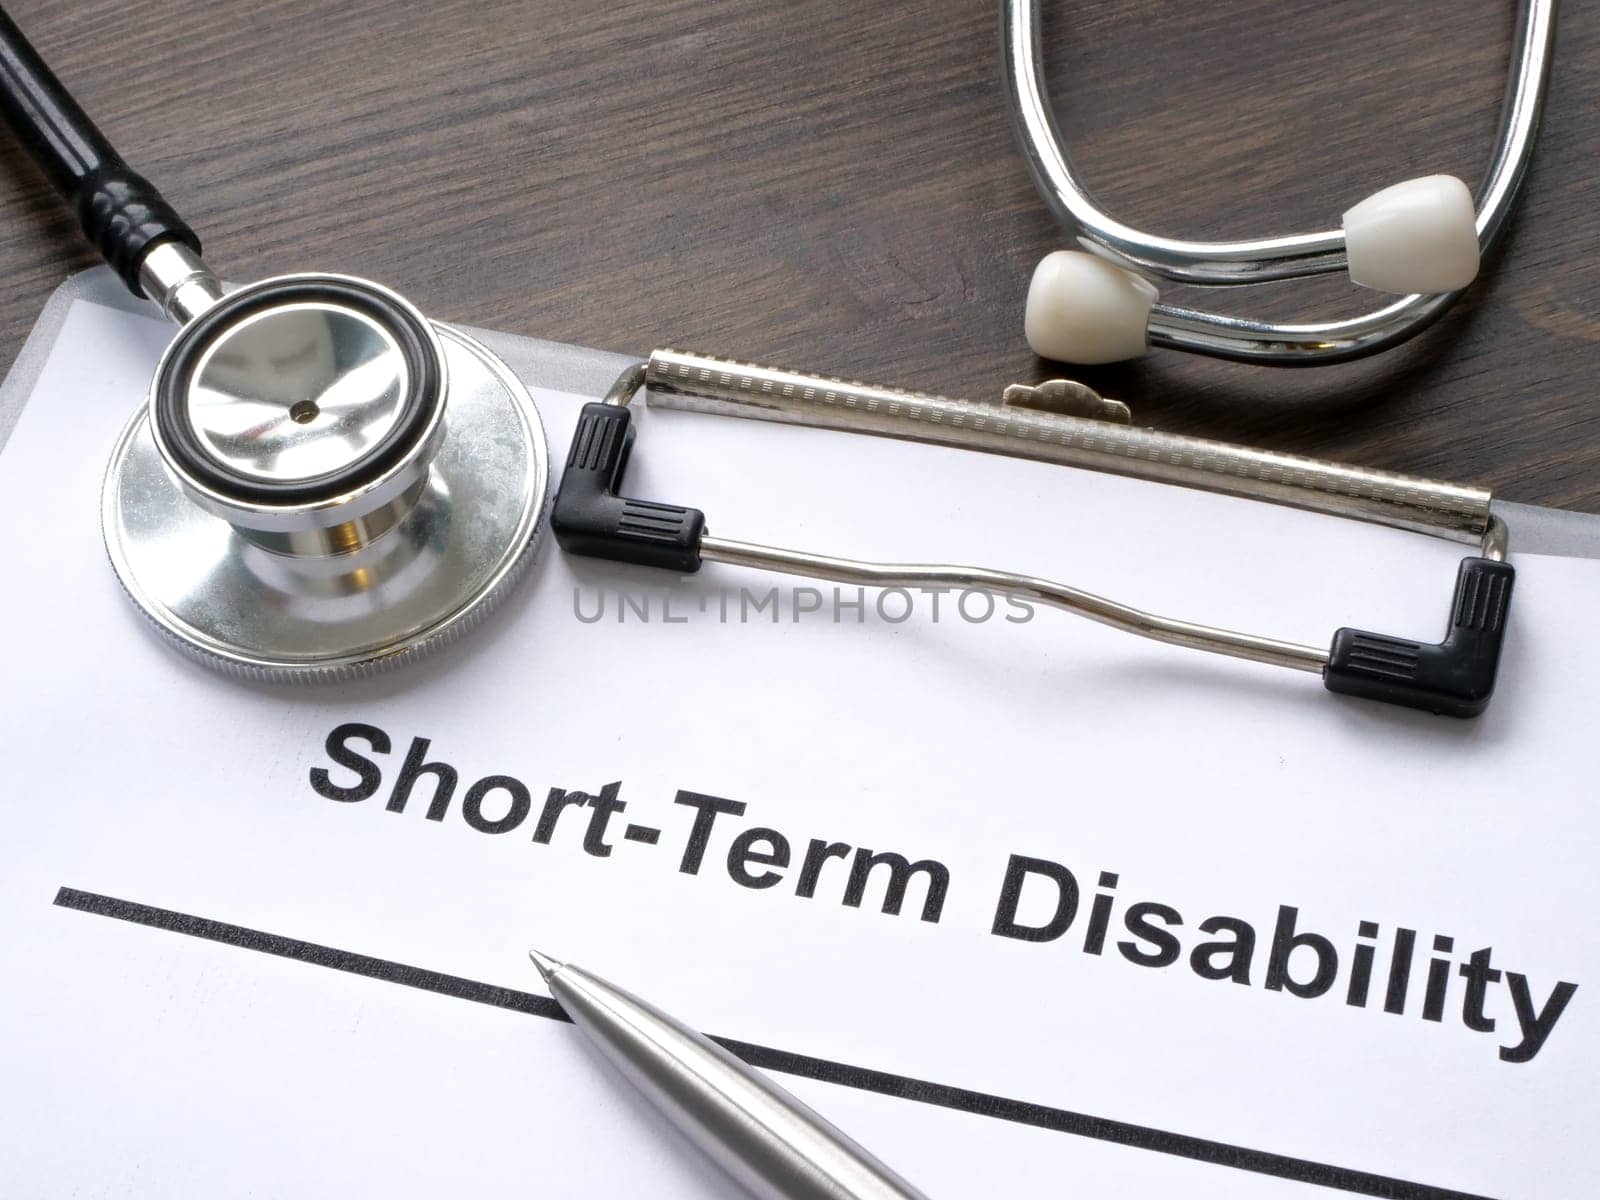 Documents about short term disability and stethoscope. by designer491